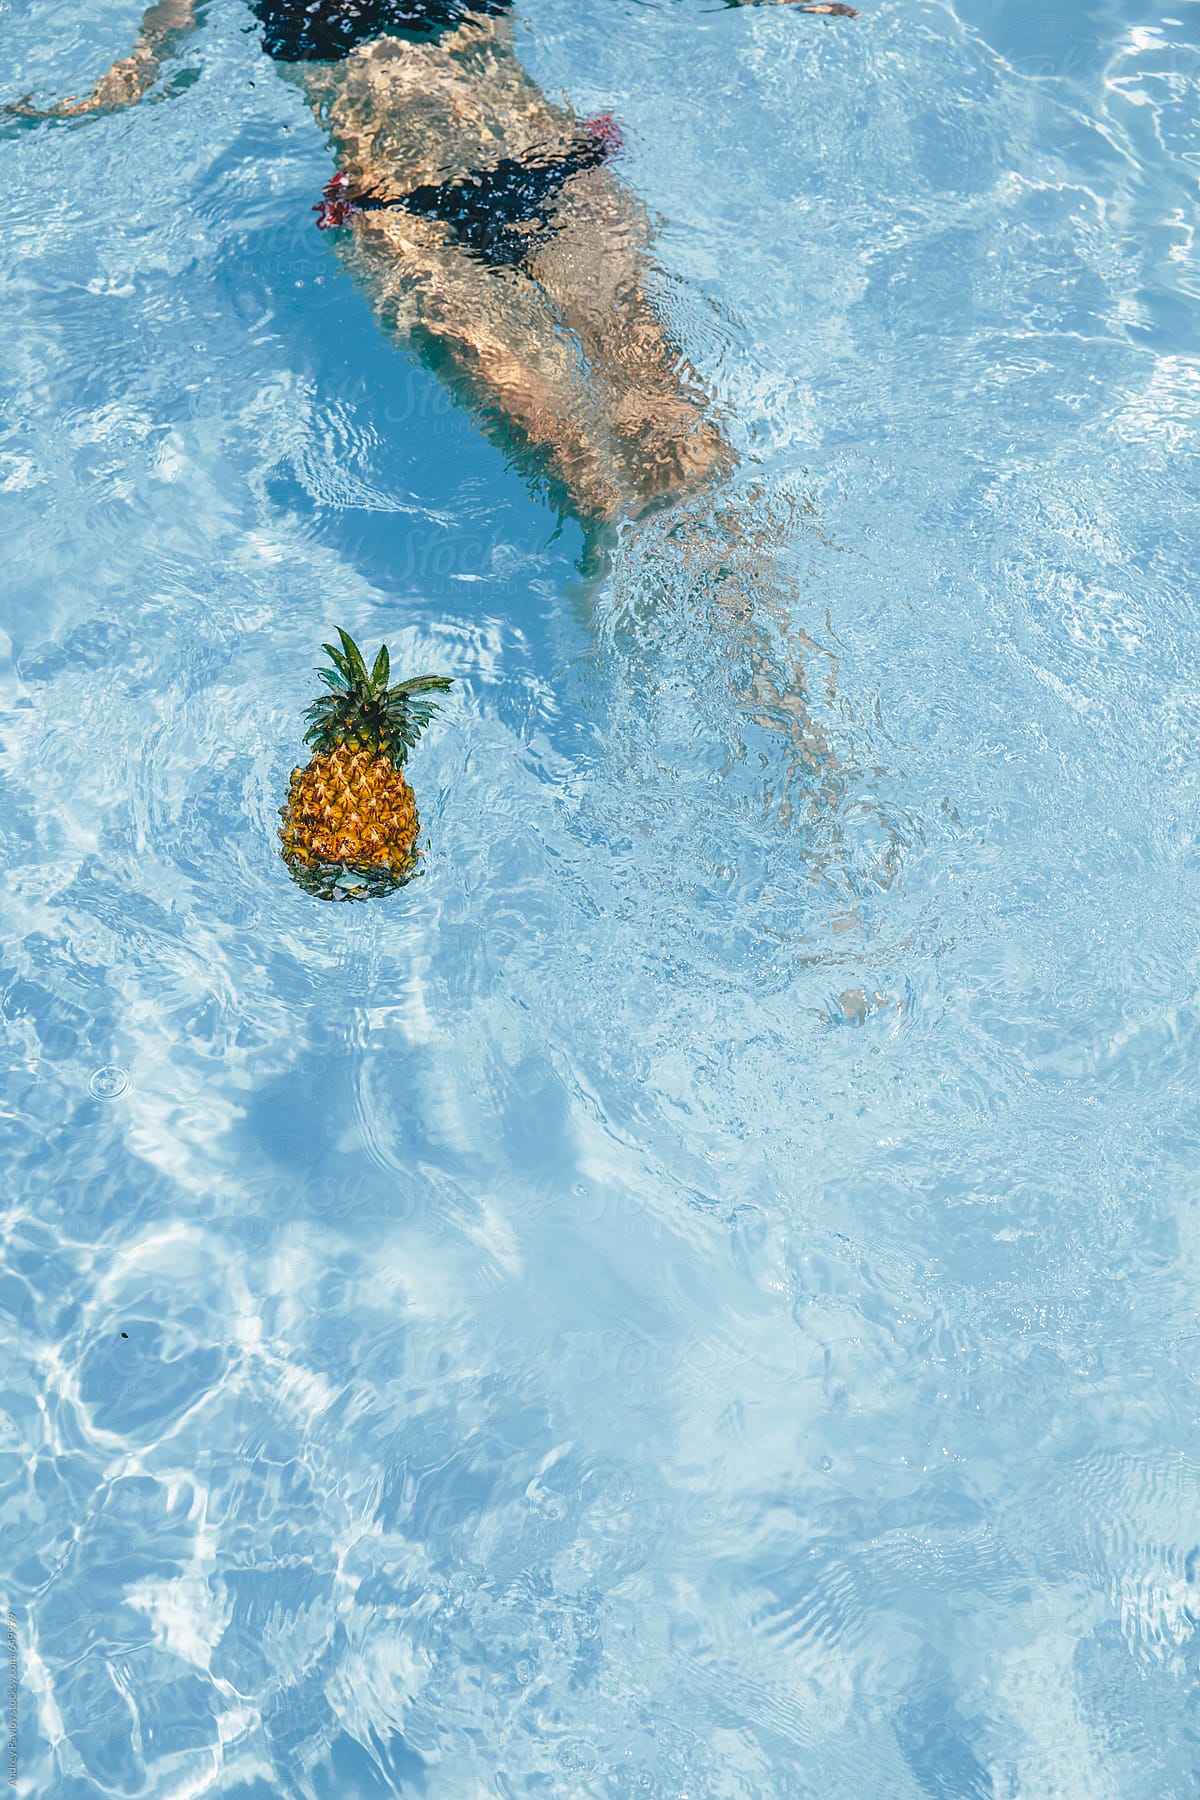 Woman and pineapple in a pool